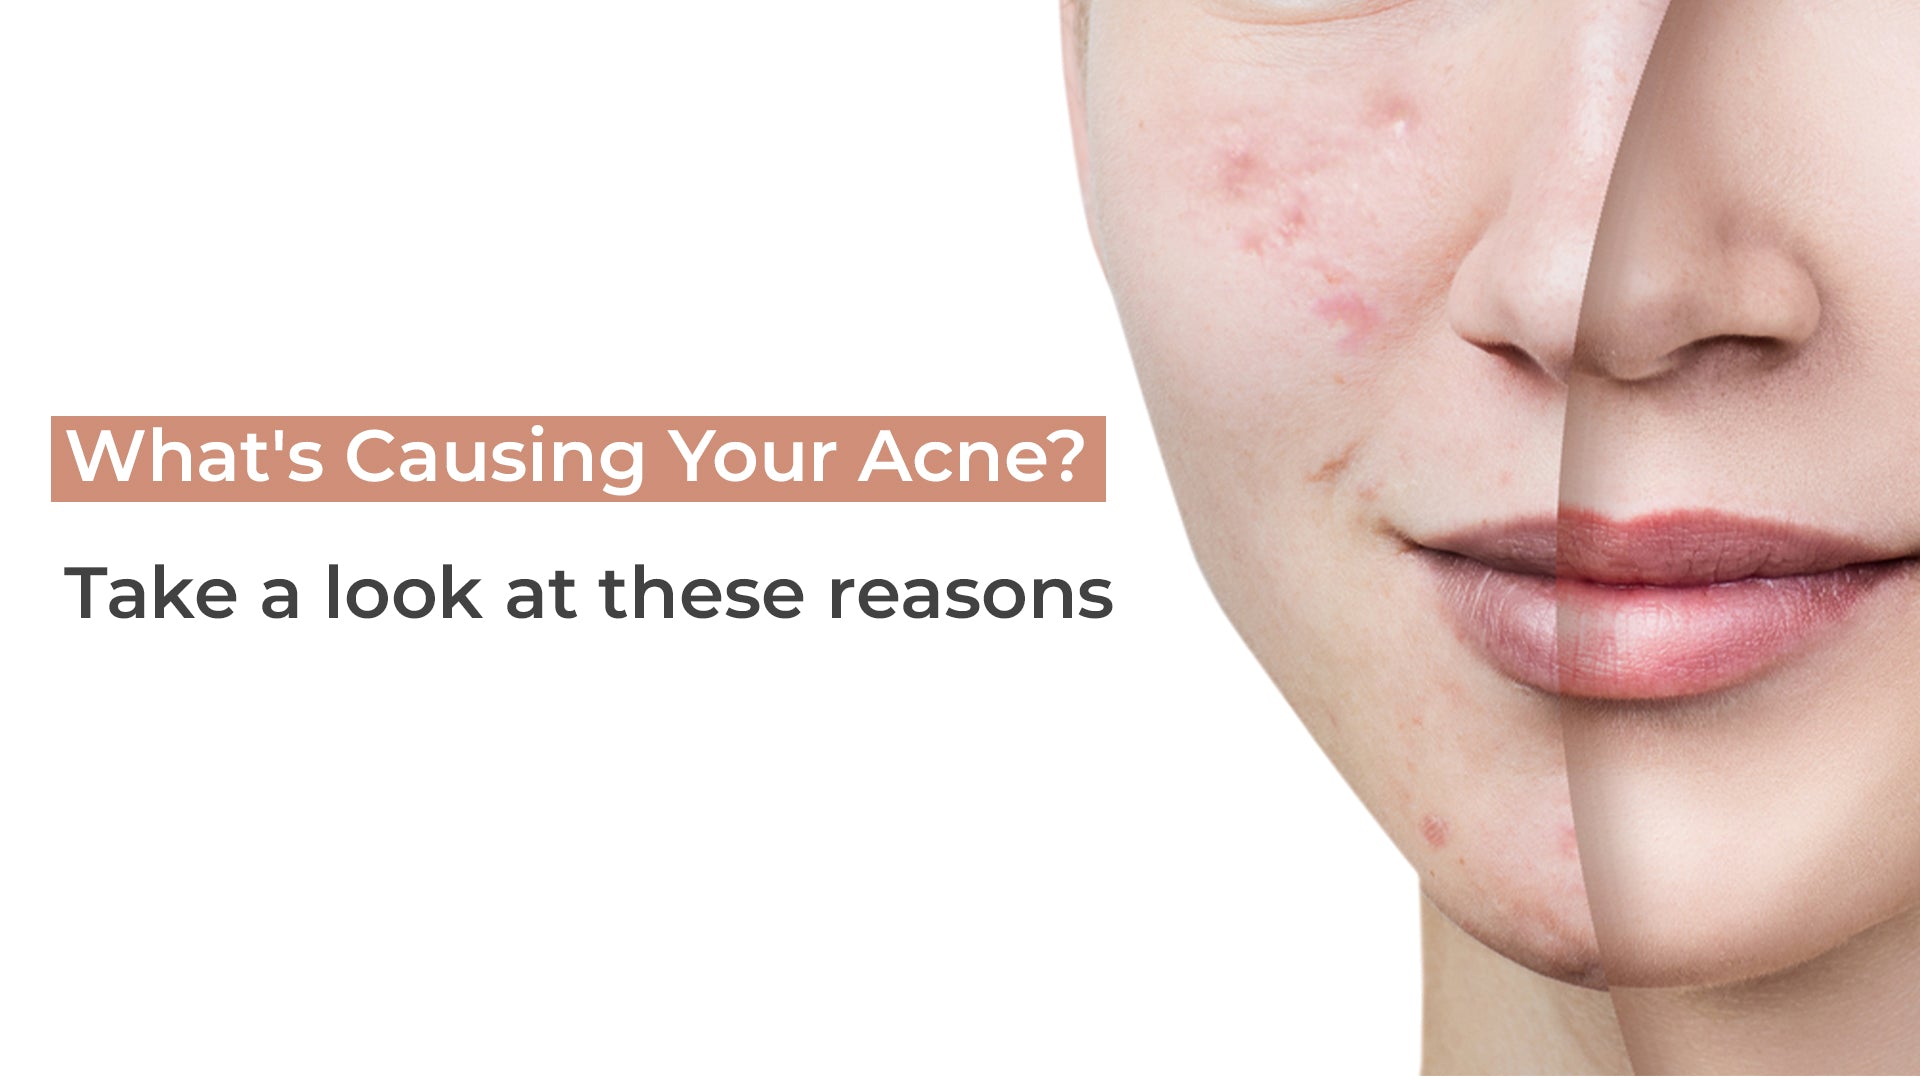 What's Causing Your Acne? Take a Look At These Reasons